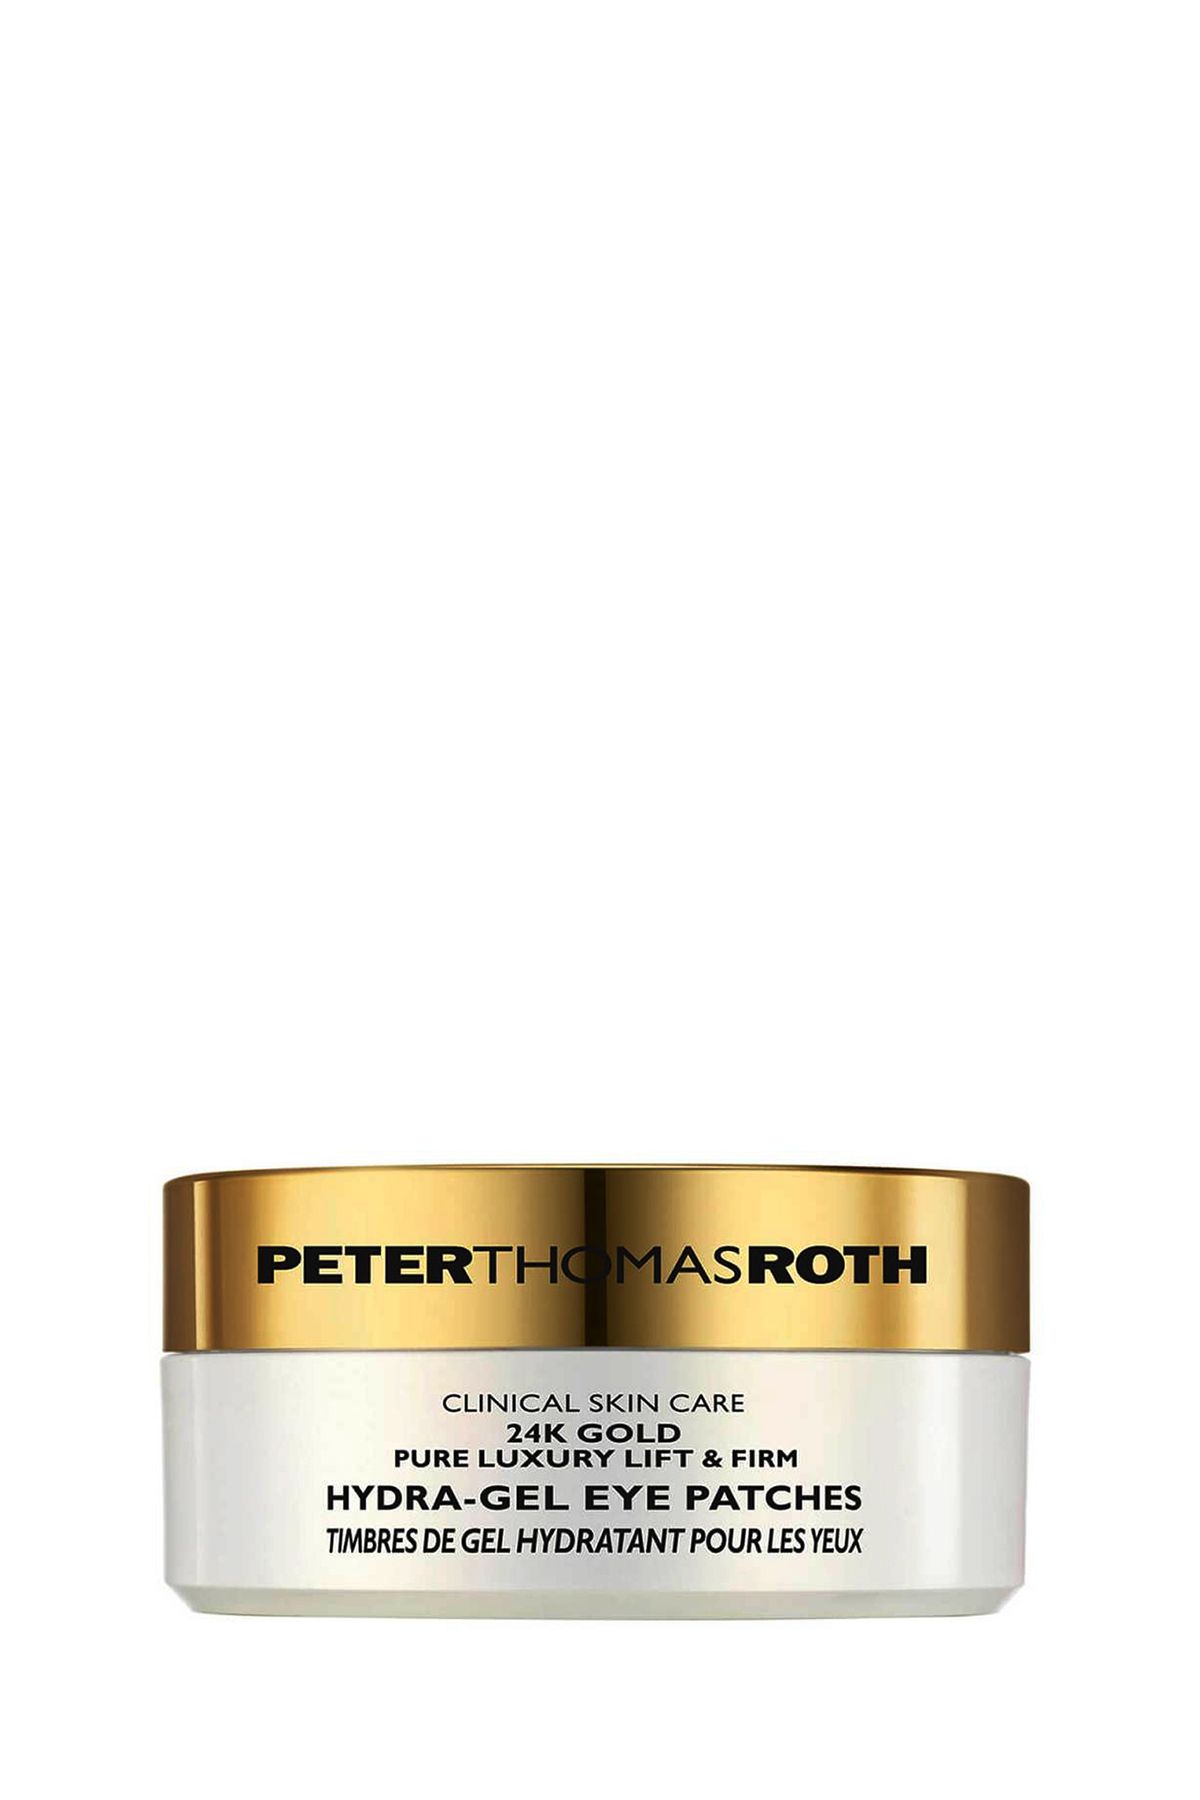 PETER THOMAS ROTH 24k Pure Luxury Lift And Firm Hydra Gel Eye Patches